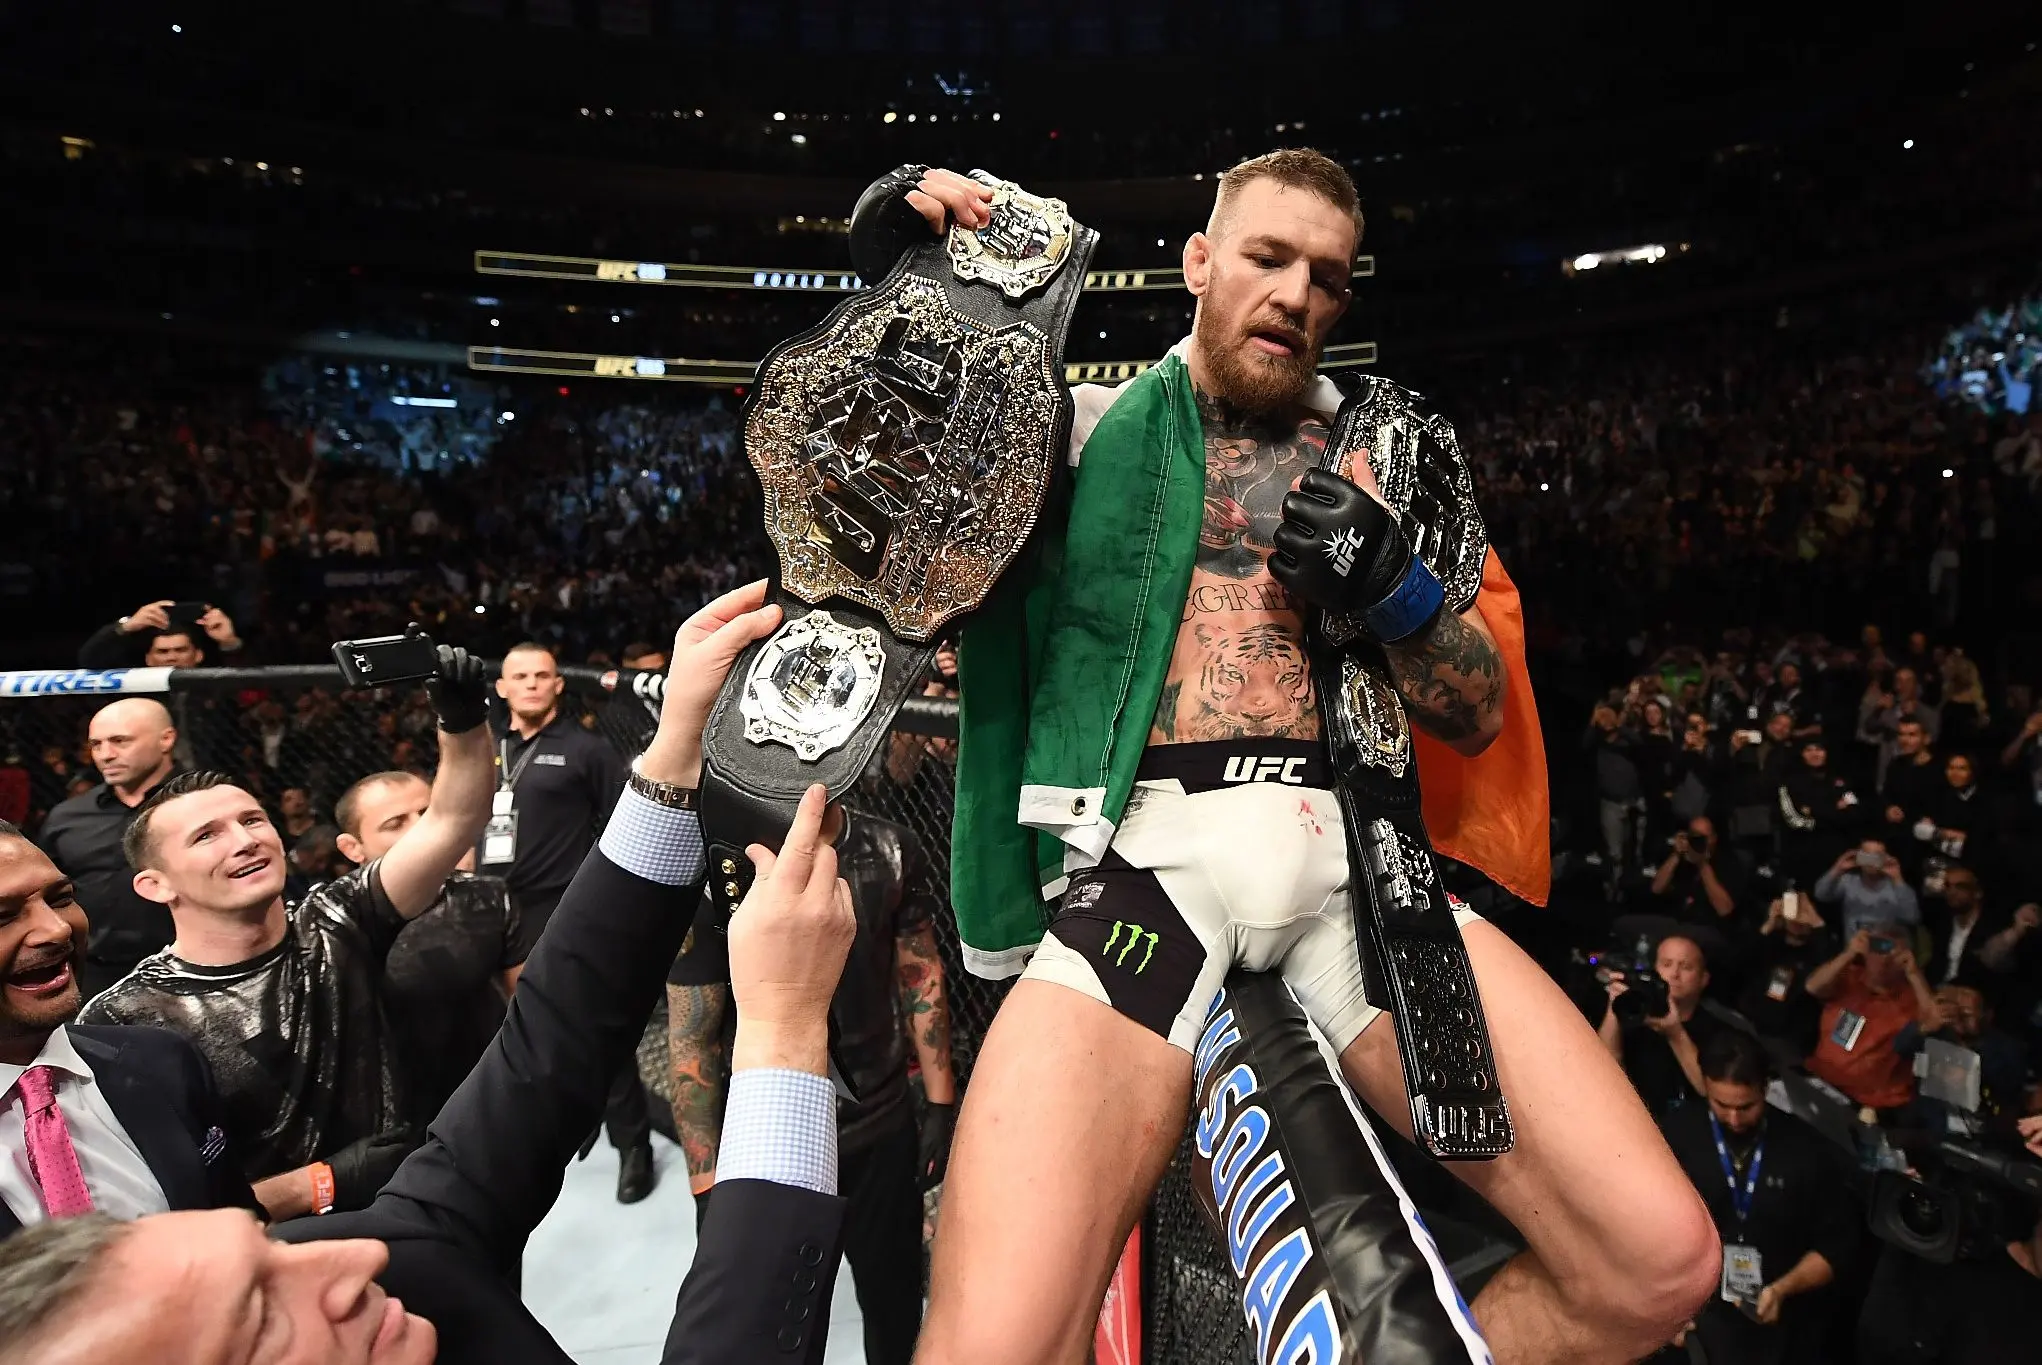 Conor McGregor celebrates on the cage with his UFC Lightweight and Featherweight title belts. Credit: Bleacher Report.